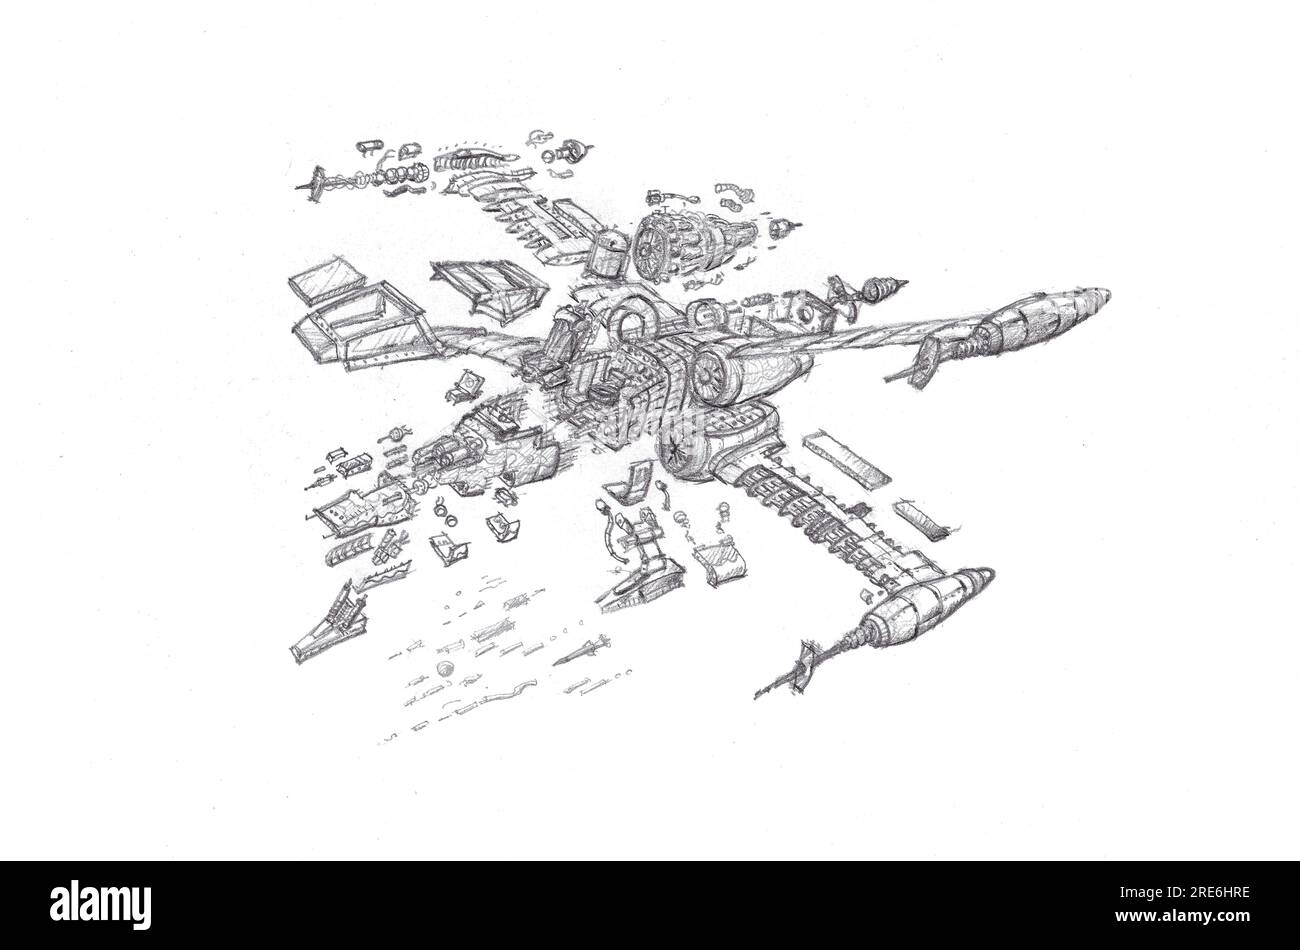 Space ship cutaway picture with exploding of wing spa, canopy, four engine, ejection seat, laser gun, cockpit and more. Drawing by pencil. Stock Photo